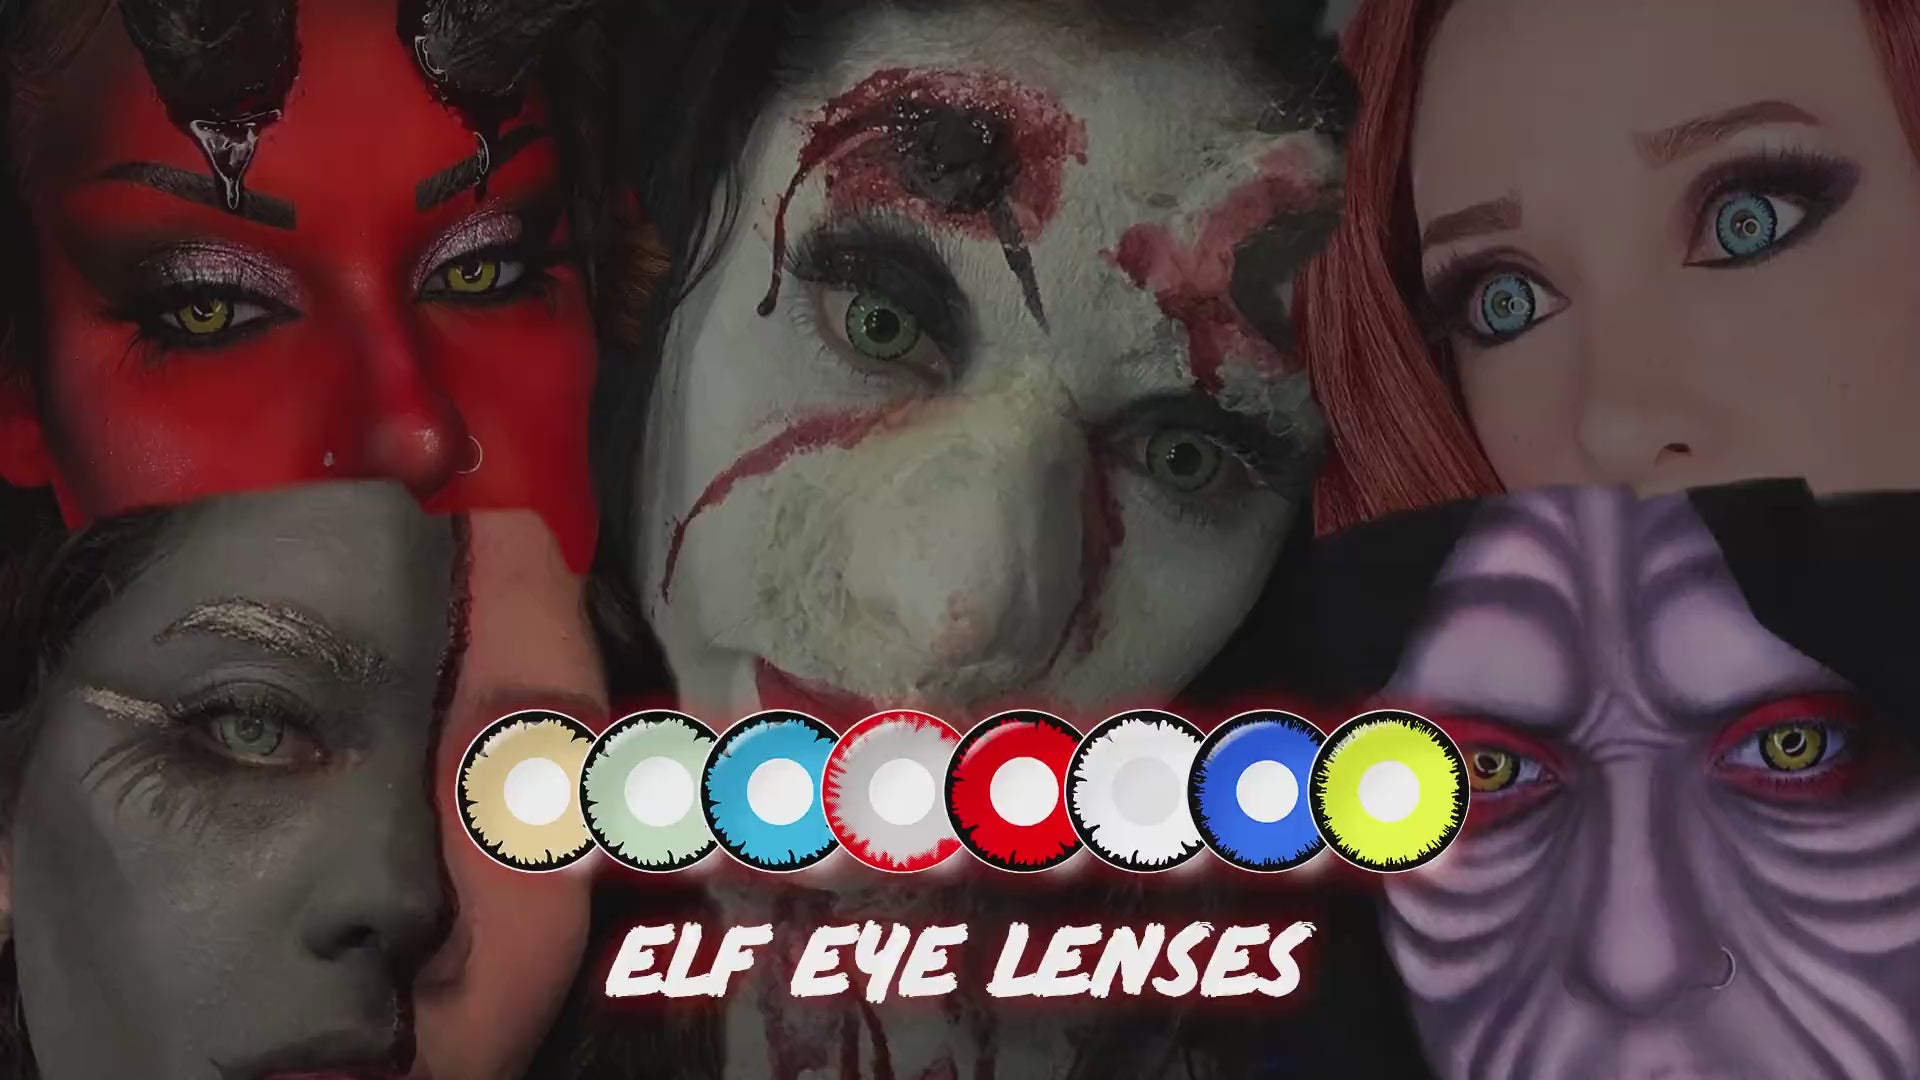 Product video presenting a range of Cosplay Elf Eye Lenses, featuring close-up views of the lenses in various shades and demonstrating how they appear when applied to the eyes.